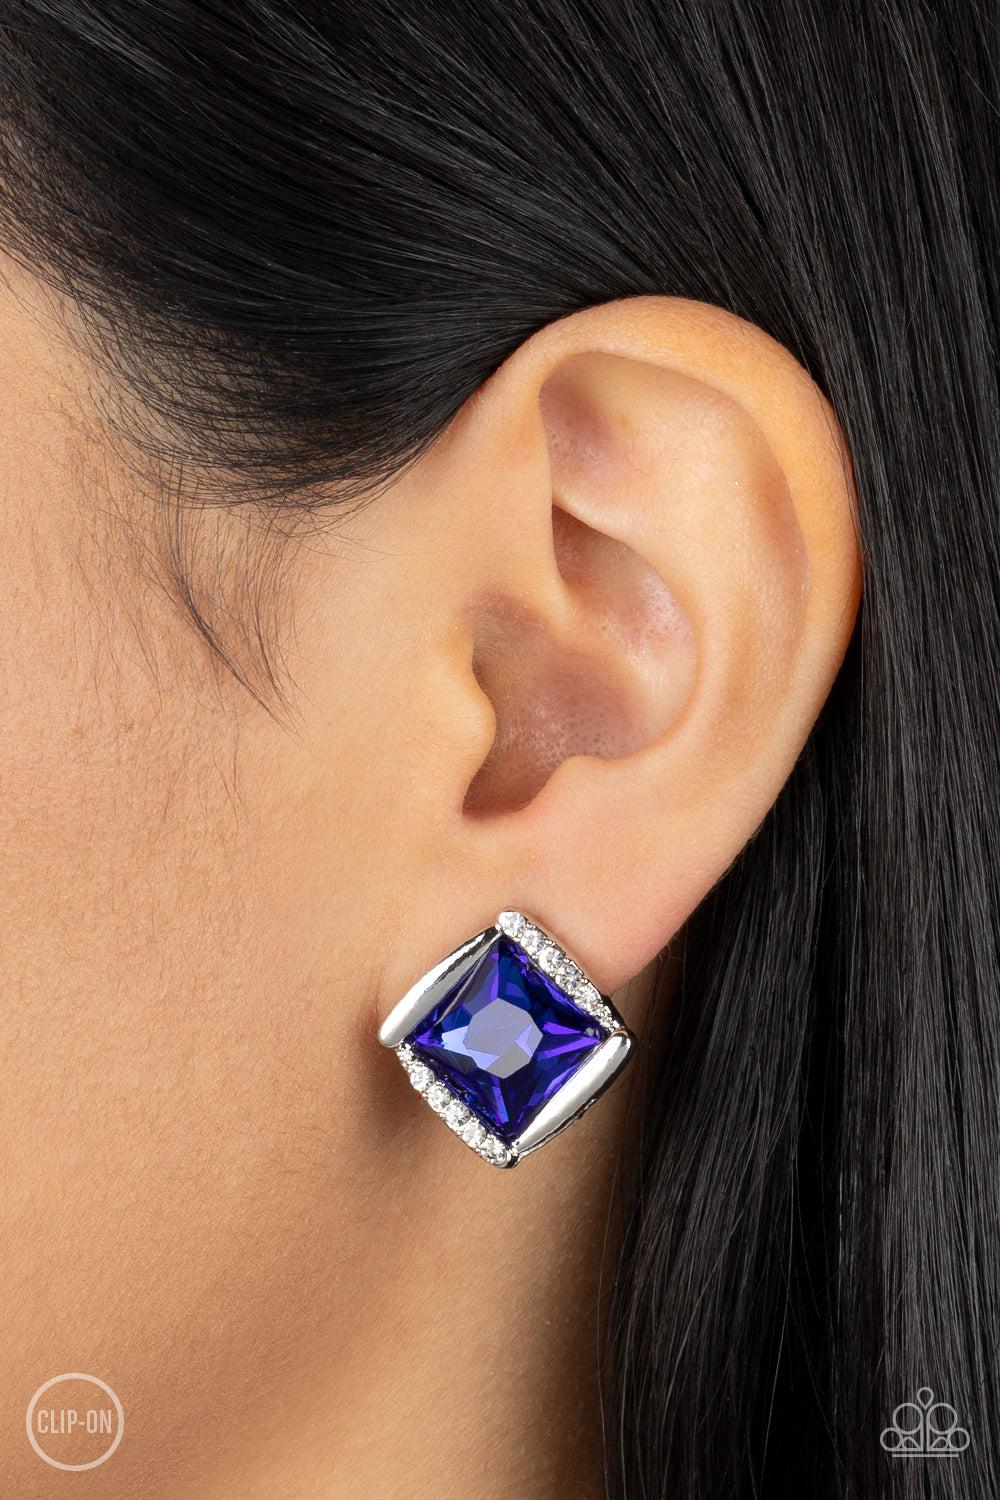 Sparkle Squared Blue &amp; White Rhinestone Clip-on Earrings - Paparazzi Accessories-on model - CarasShop.com - $5 Jewelry by Cara Jewels